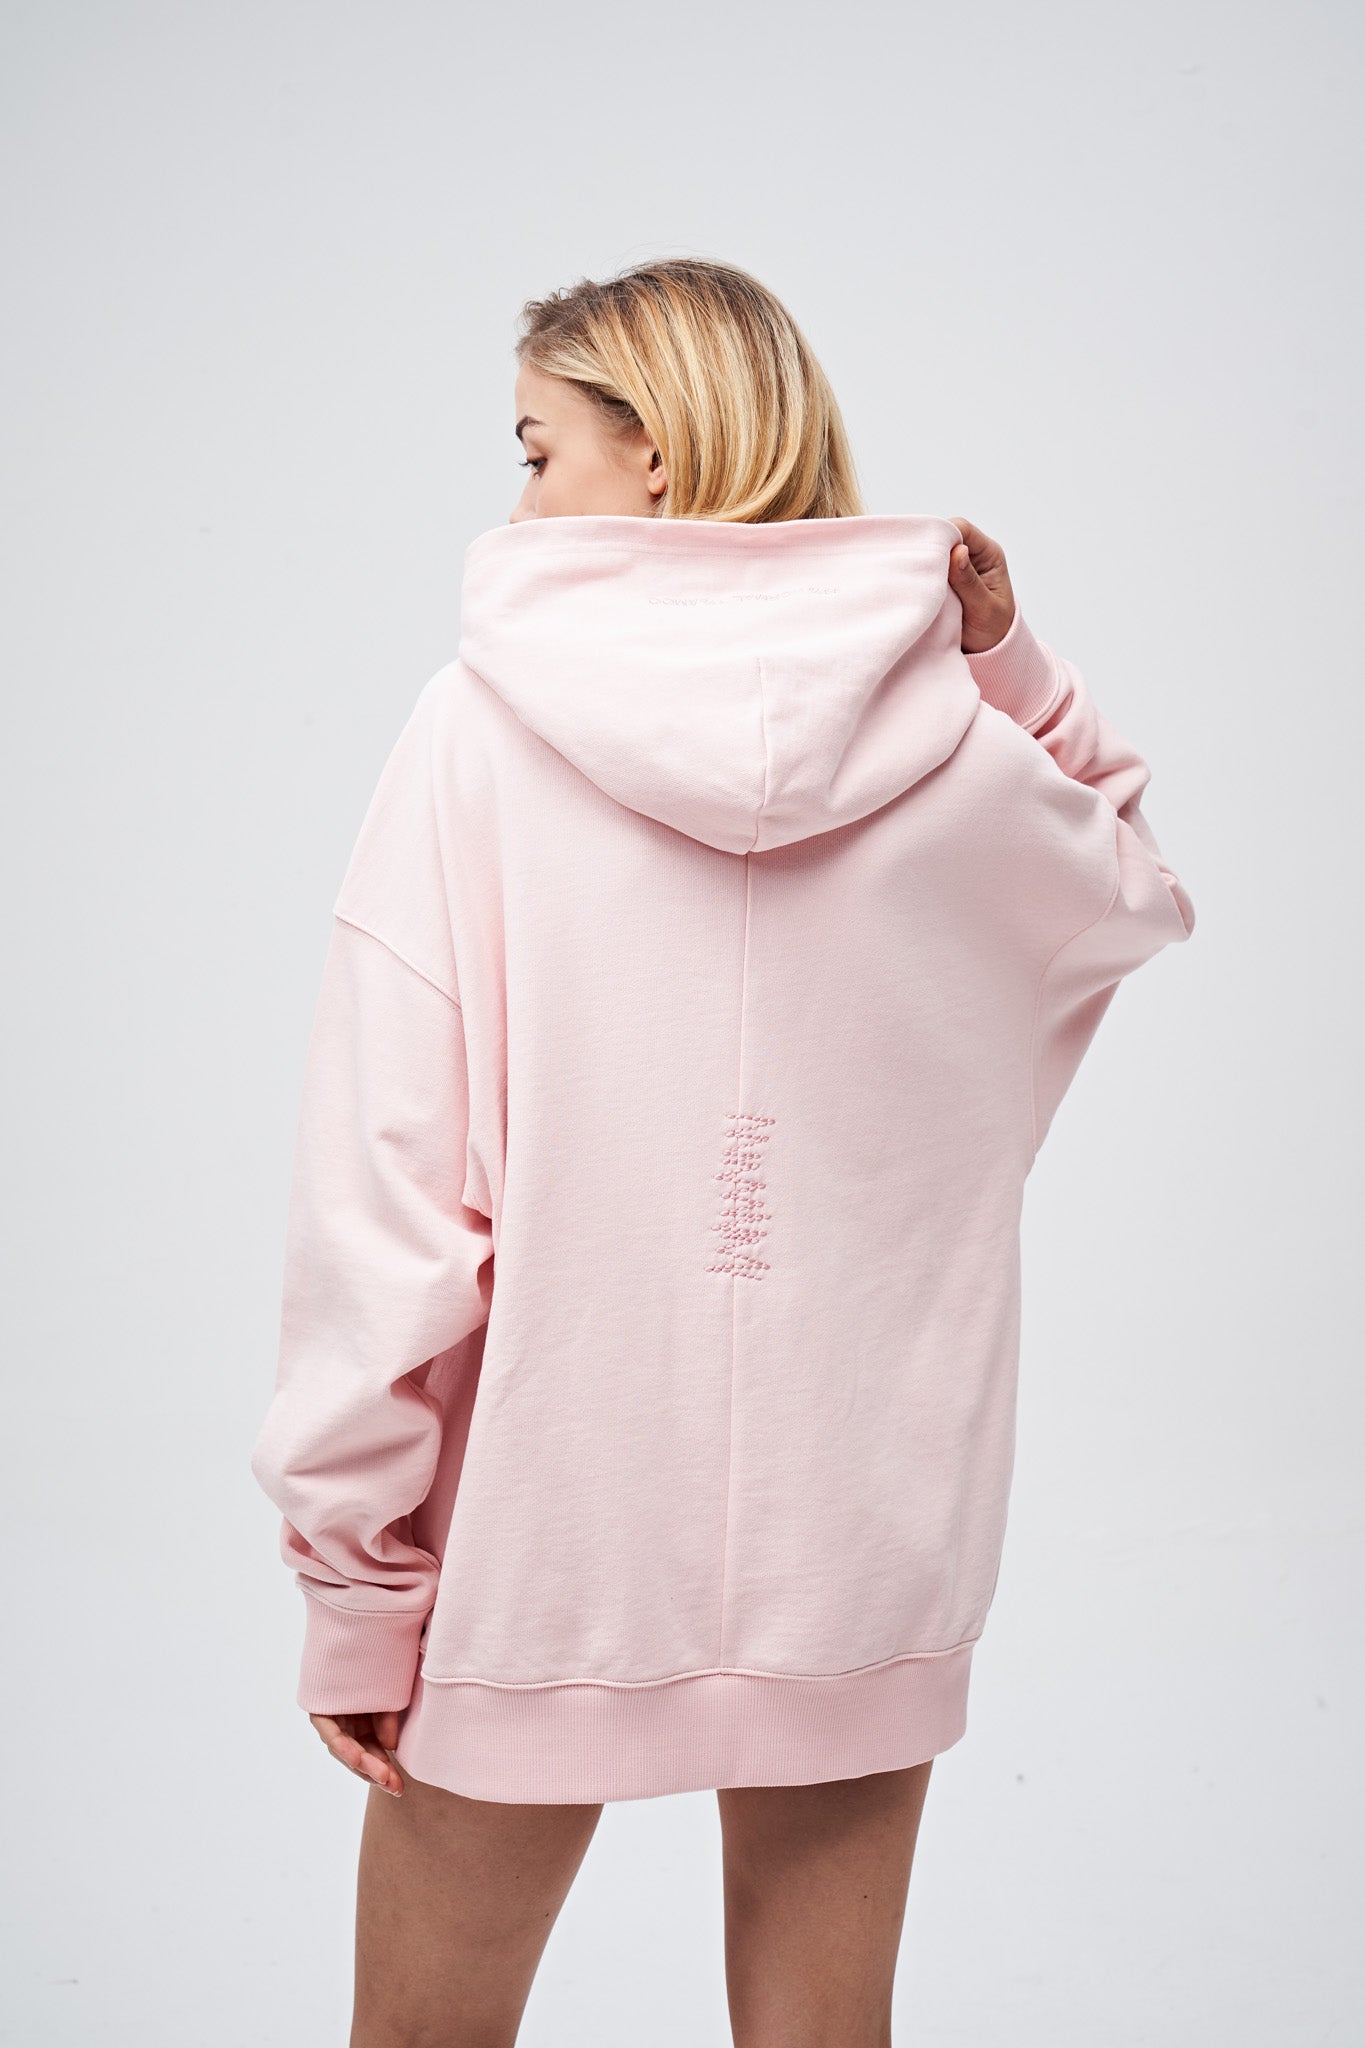 Plain pink all in motion hoodie🩷 Super soft and - Depop